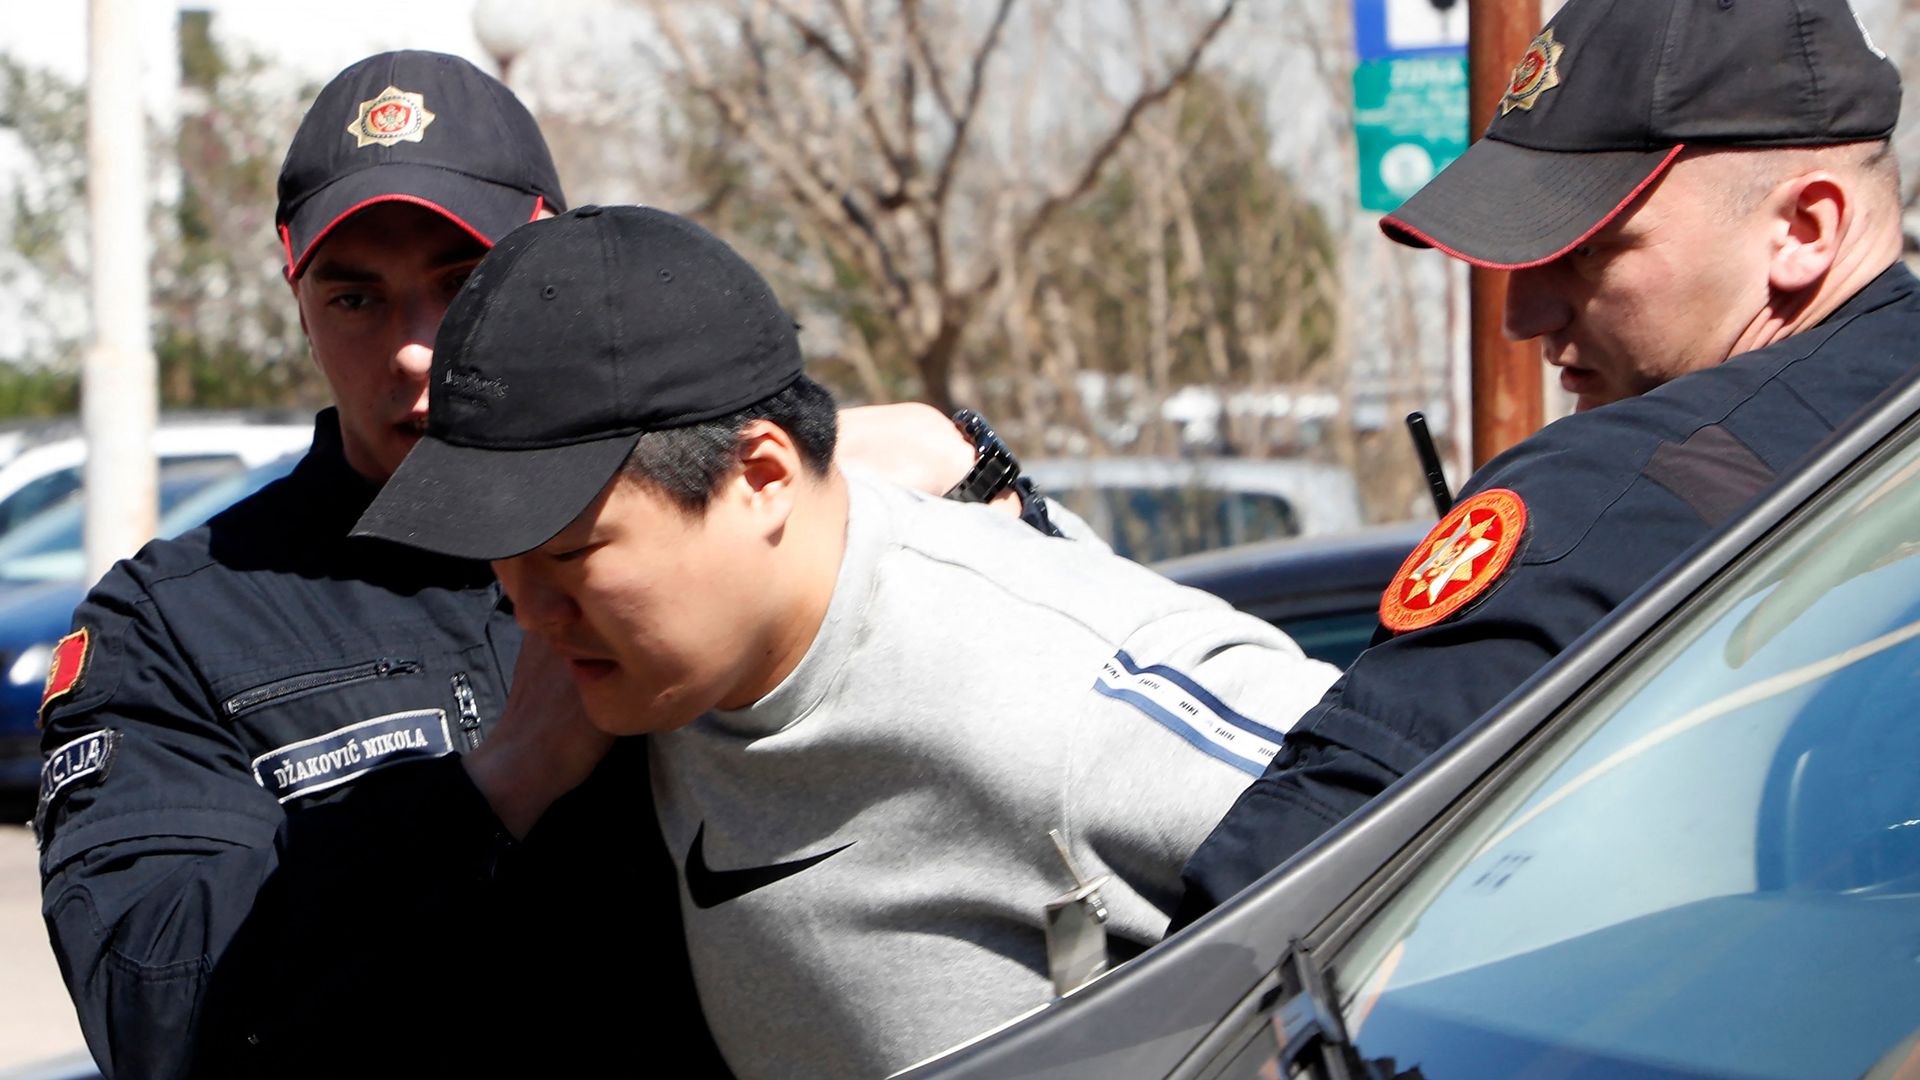 South Korean cryptocurrency entrepreneur and co-founder of Terraform Labs, Do Kwon, being escorted into court by two officers.